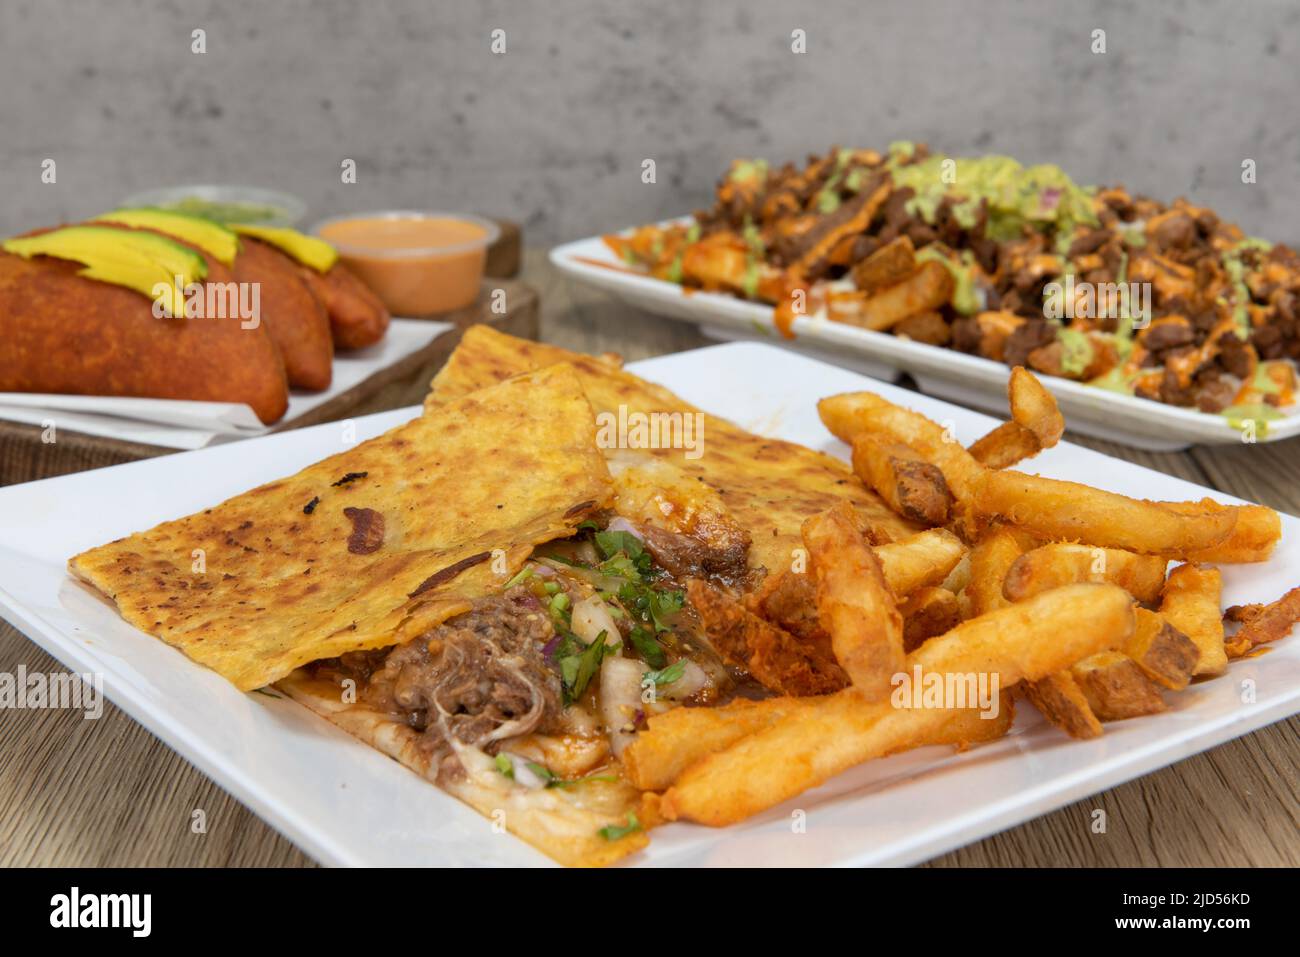 Appetizing choices of quesadilla, taco, or asada fries for a tempting Mexican food delicacy. Stock Photo